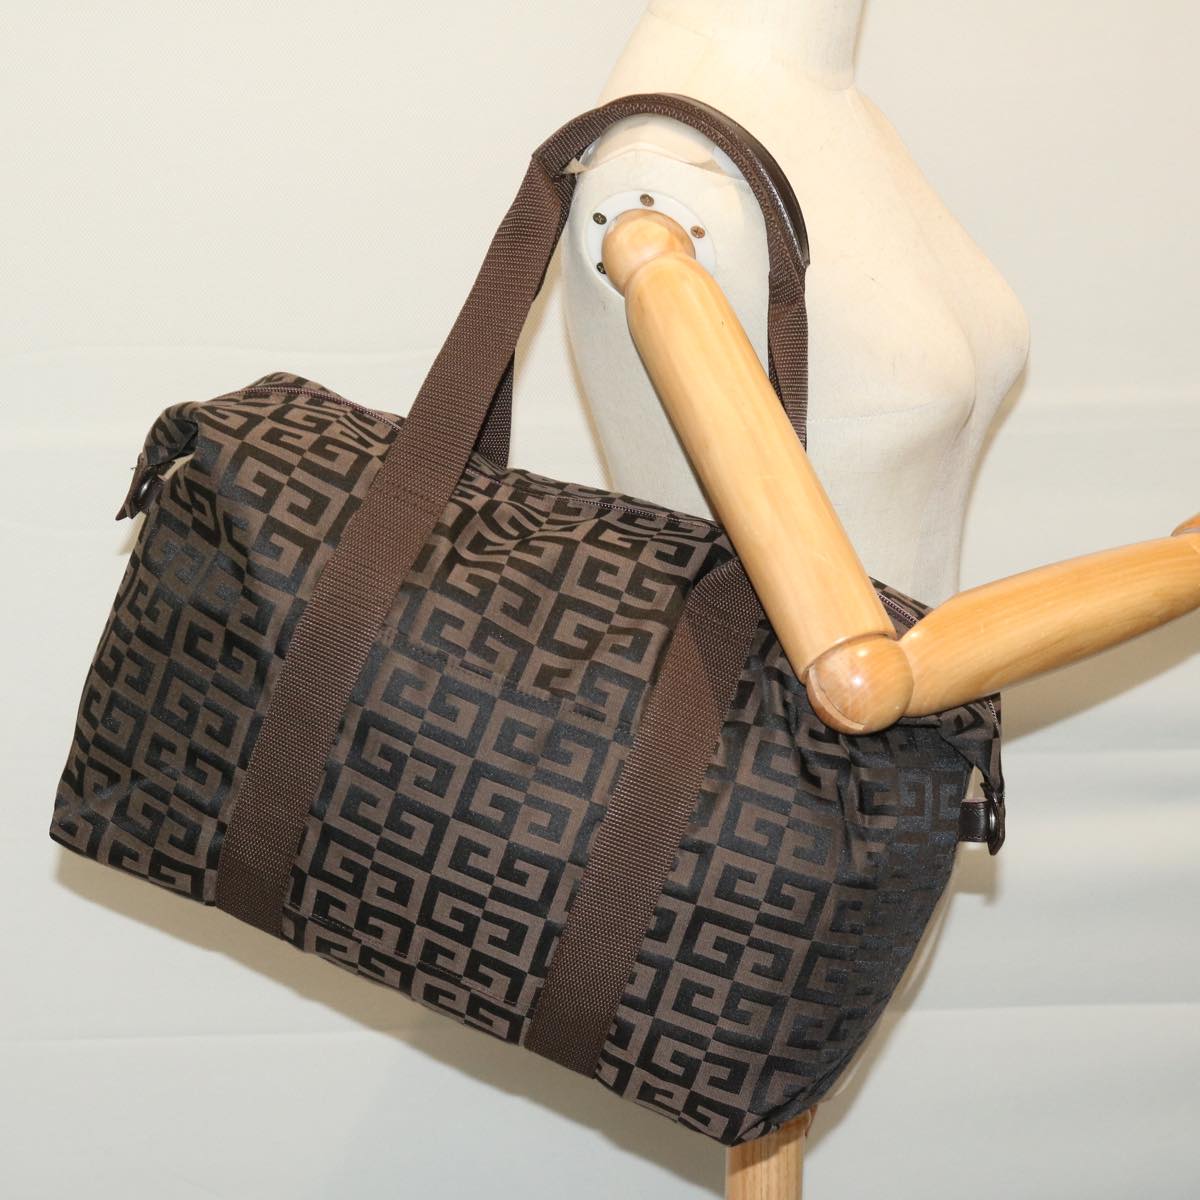 GIVENCHY Tote Bag Canvas Brown Black Auth bs12852